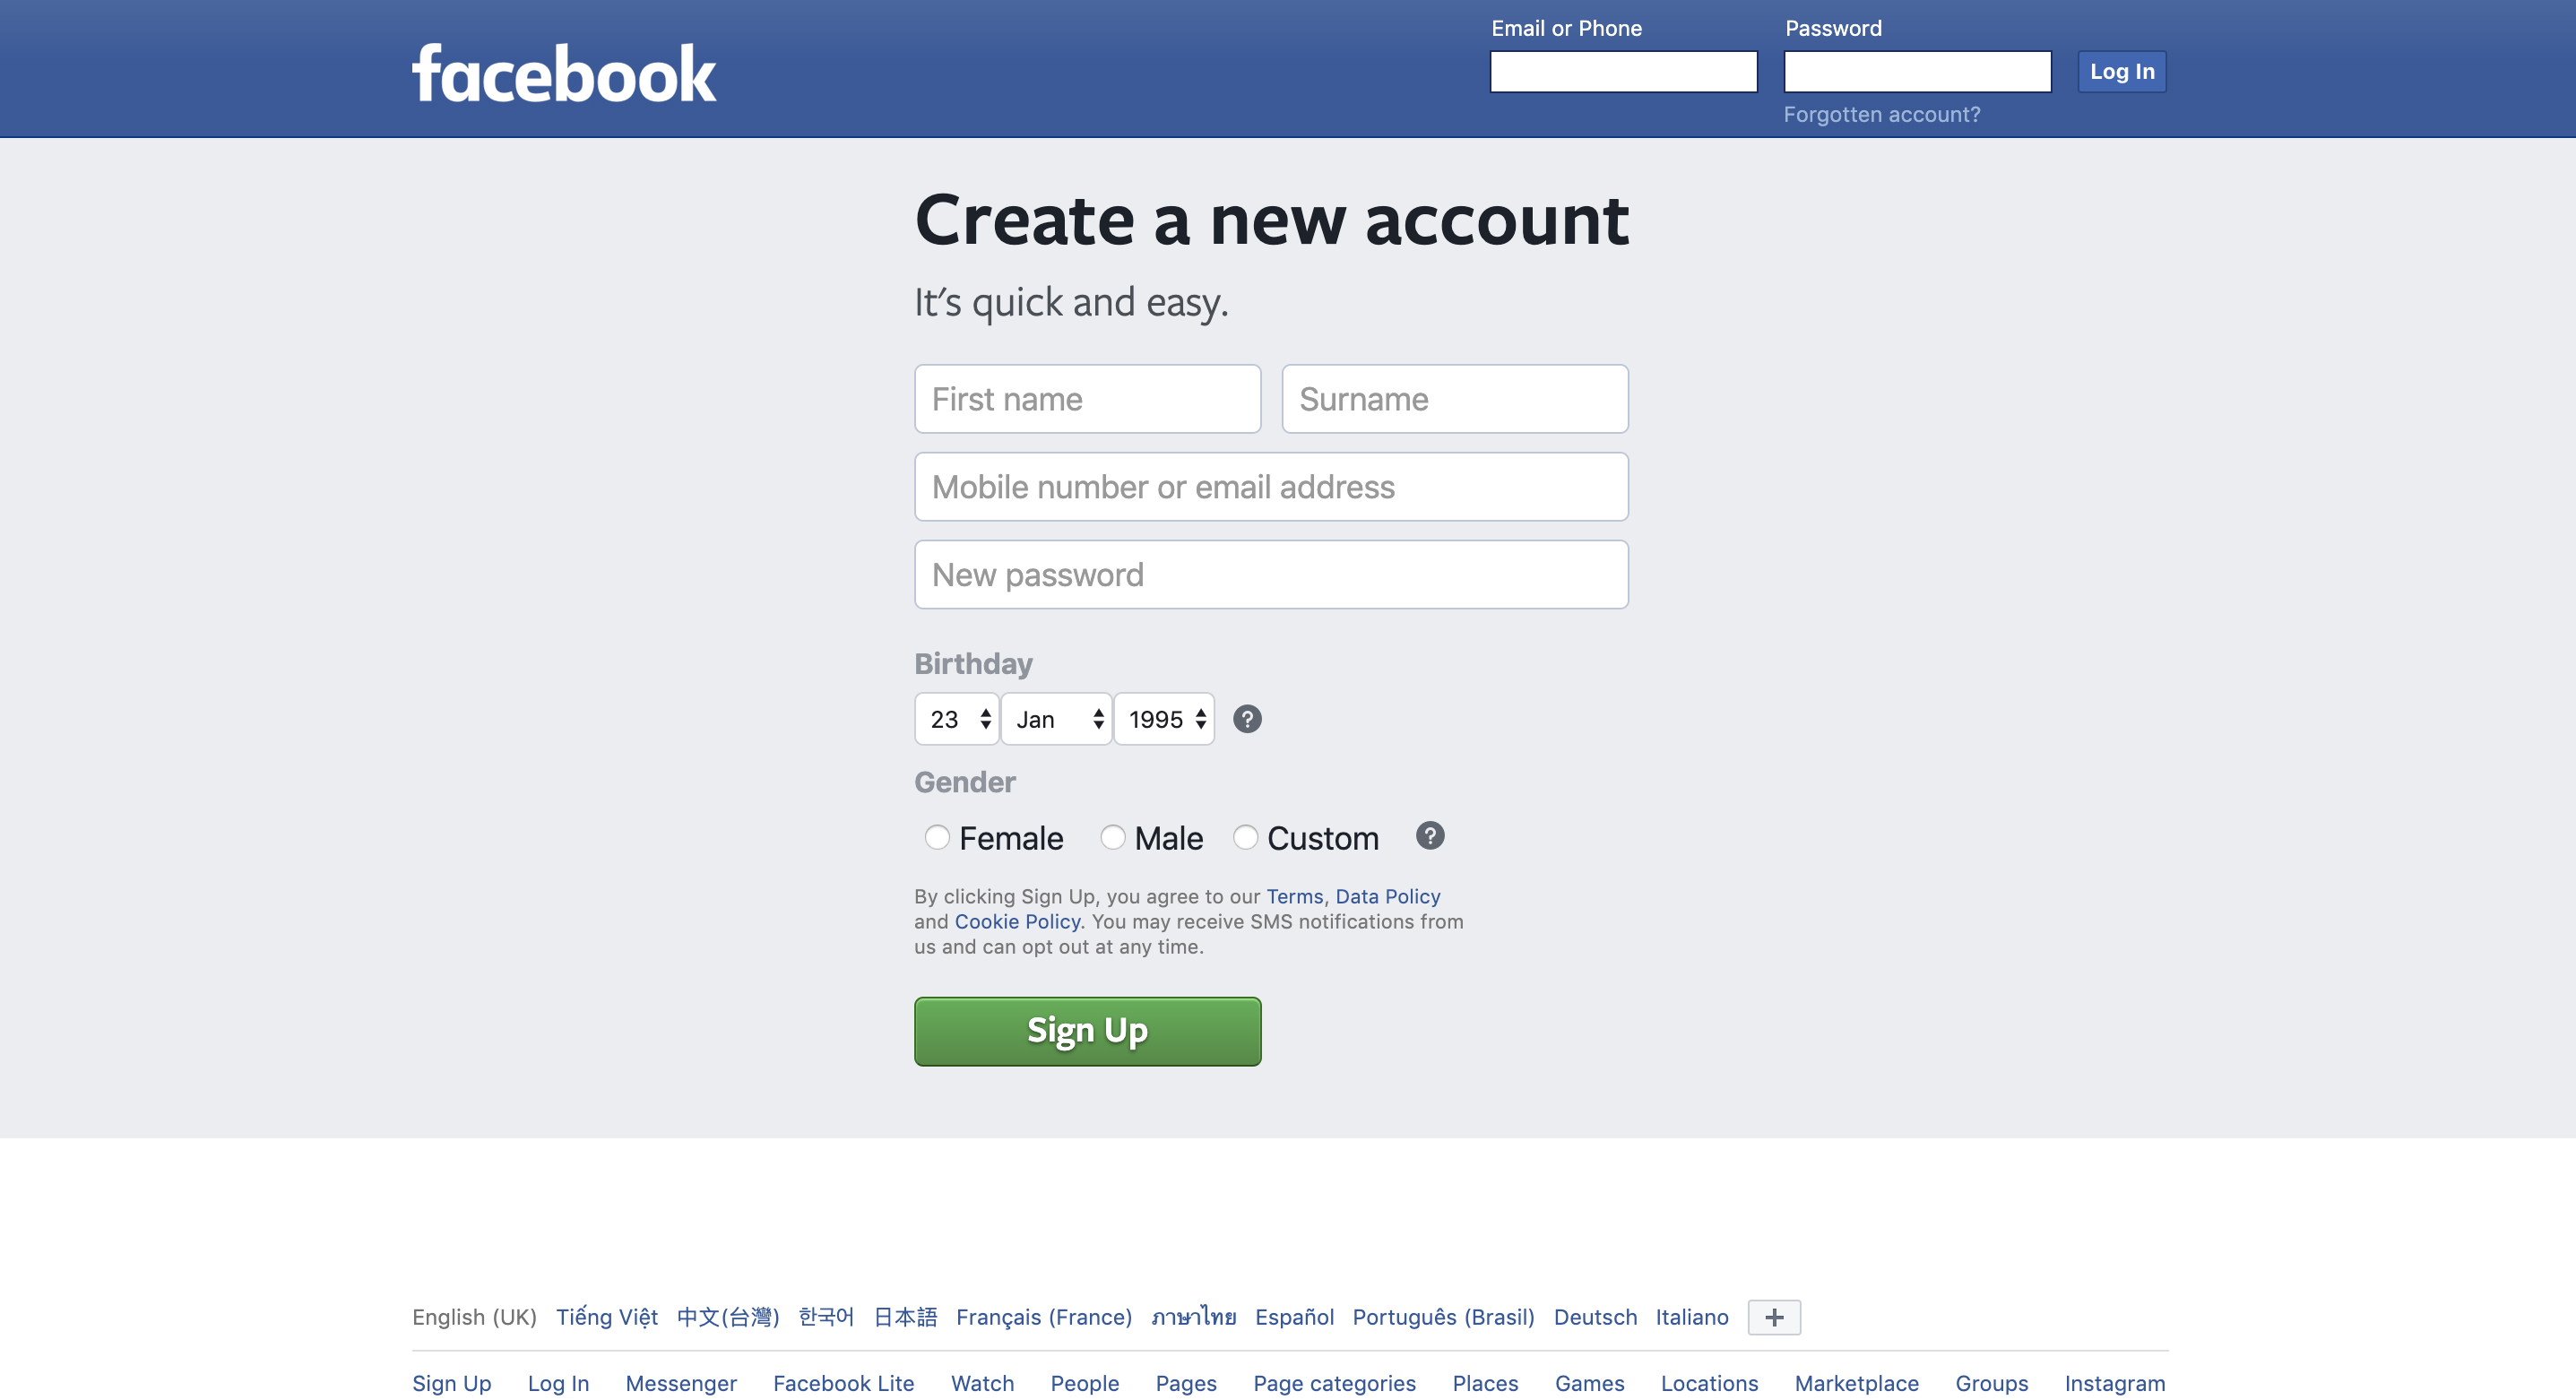 promote Shopify store on Facebook: create a page